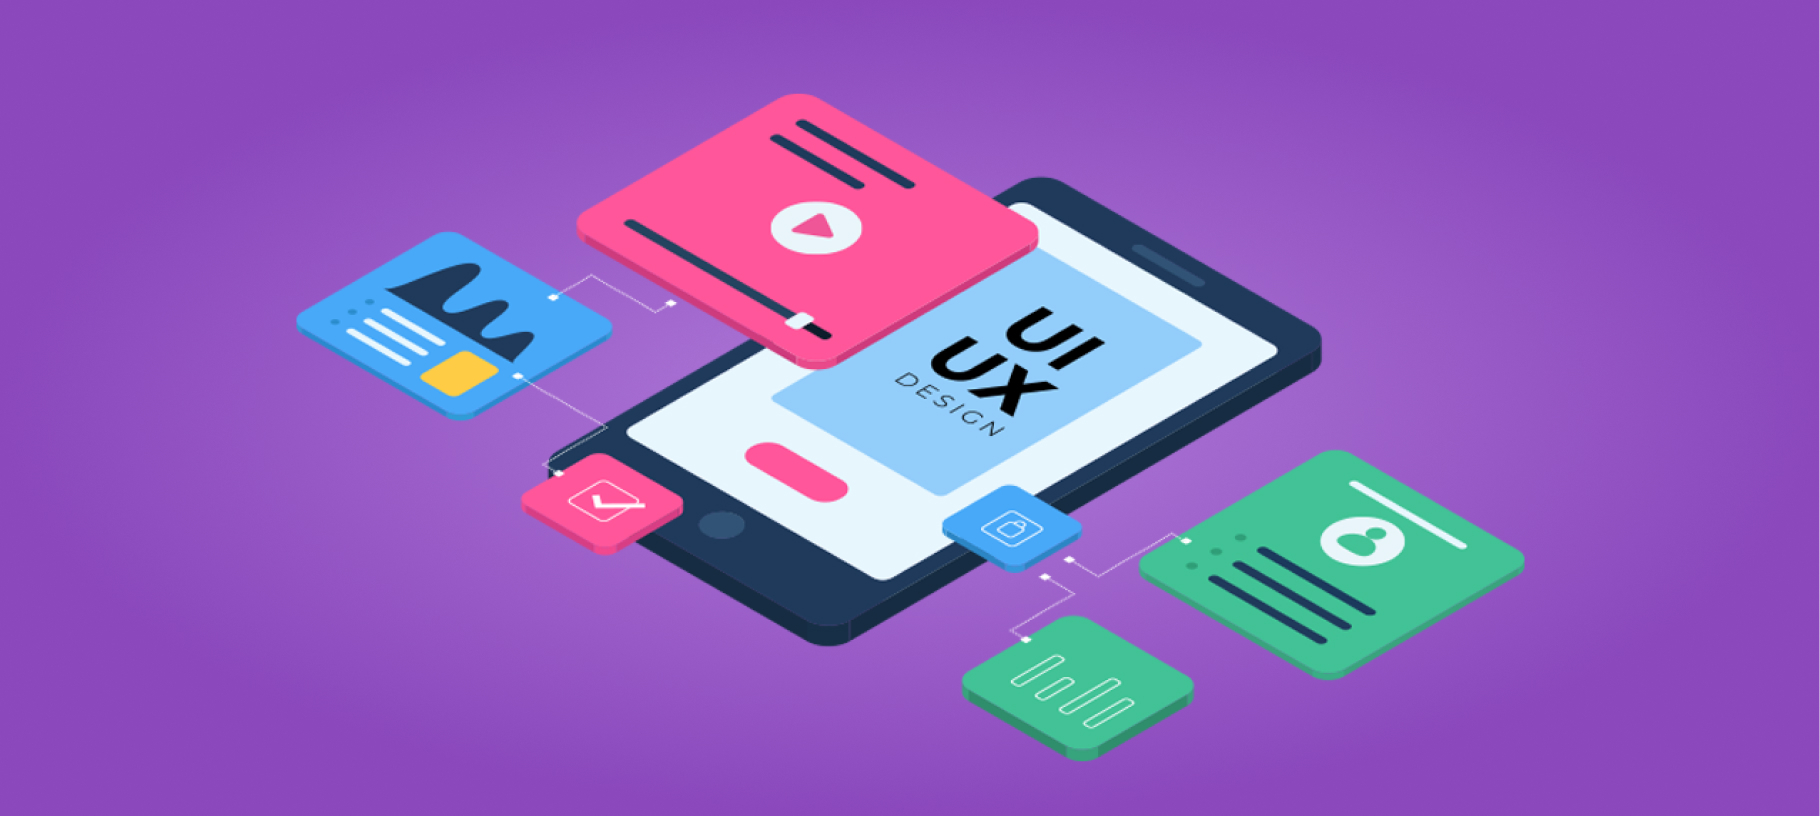 Importance of UI/UX Design in Building a Great Product